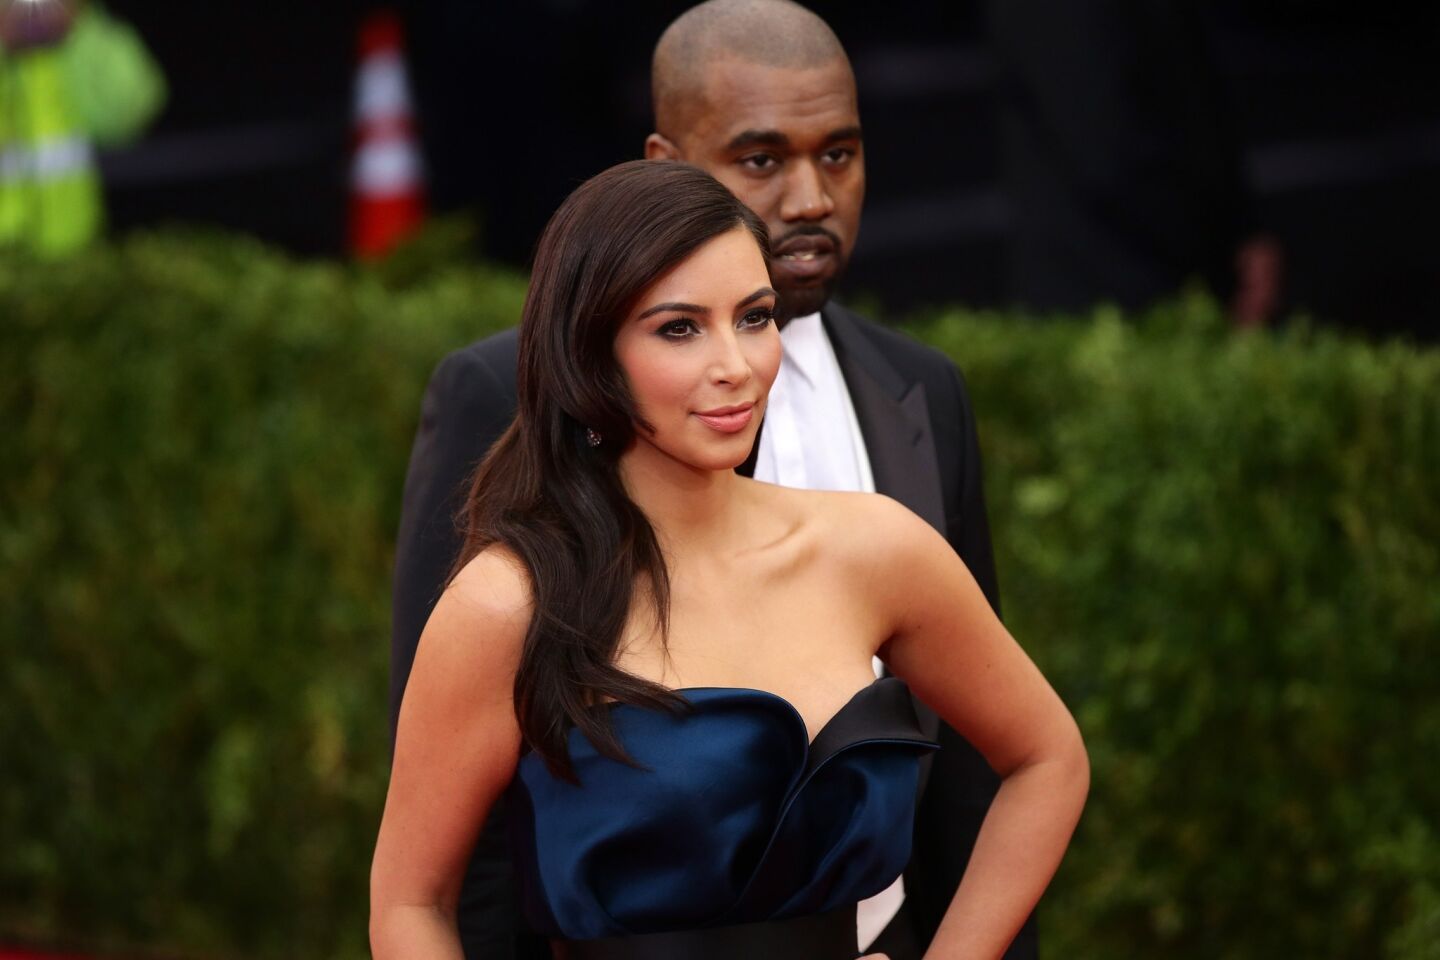 Kim Kardashian and Kanye West attend the "Charles James: Beyond Fashion" Costume Institute Gala at the Metropolitan Museum of Art on May 5, 2014 in New York City.